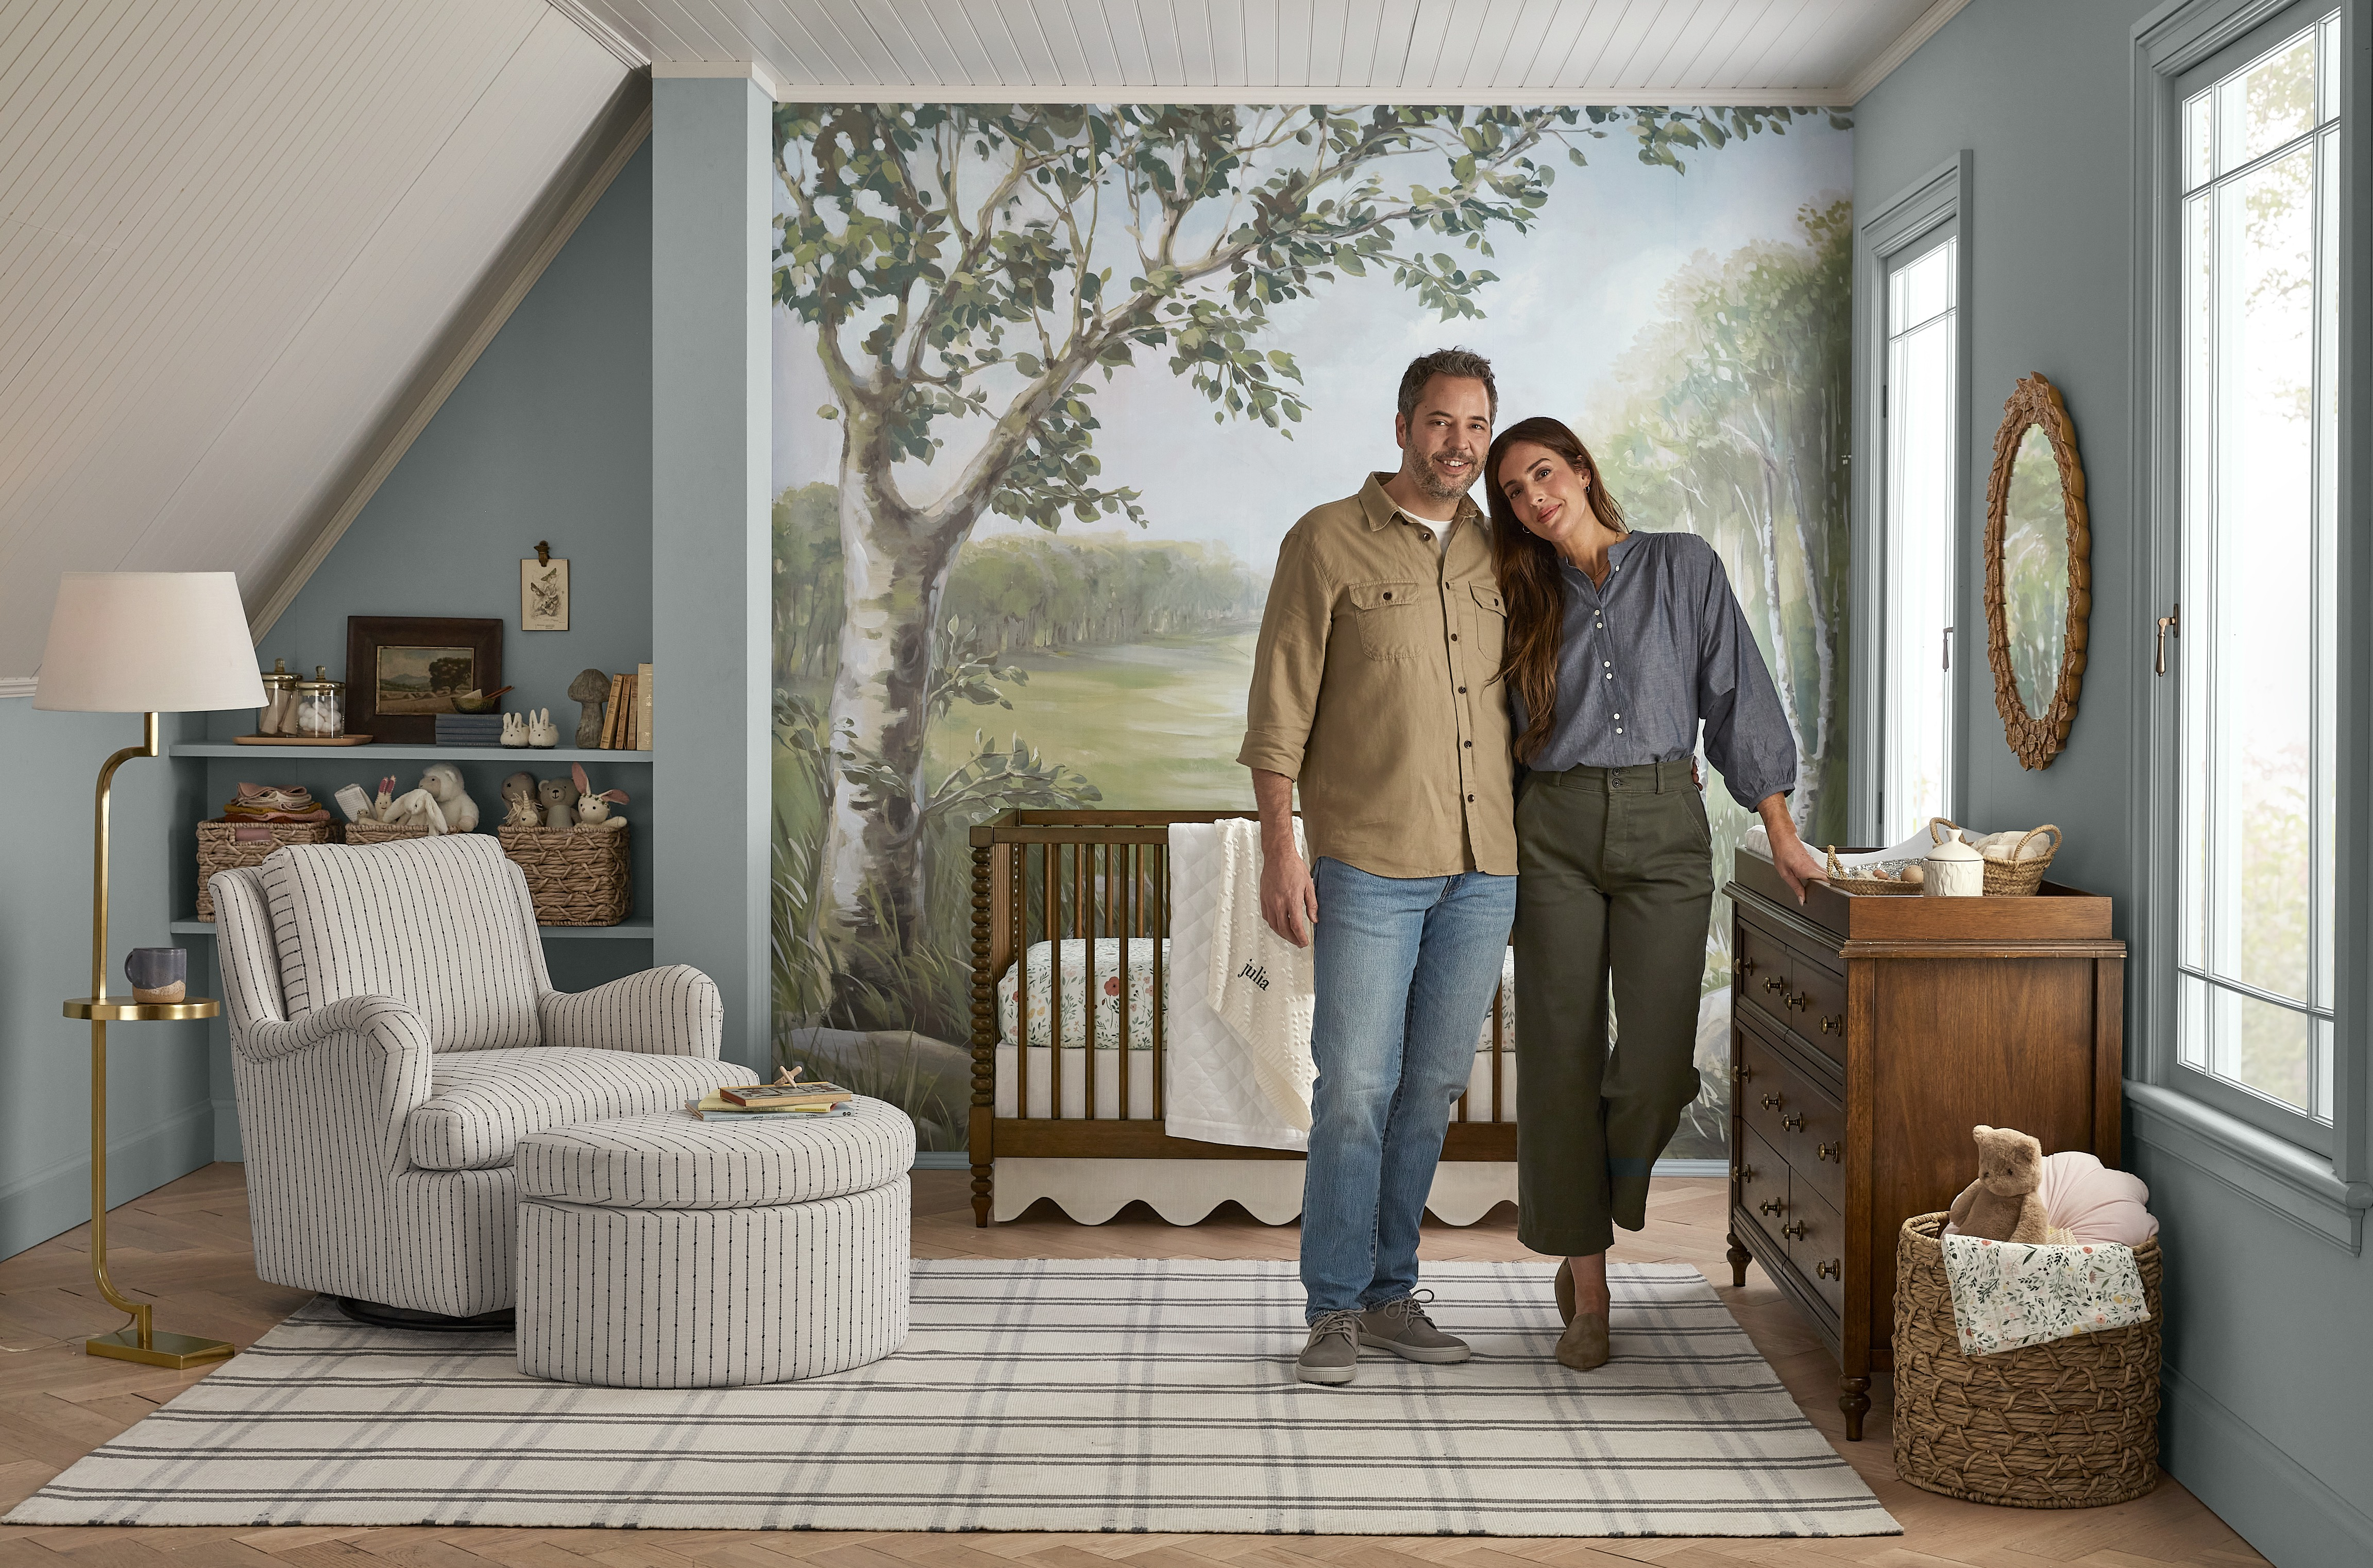 POTTERY BARN KIDS LAUNCHES EXCLUSIVE COLLABORATION WITH HOME DESIGN  INFLUENCER DUO, CHRIS LOVES JULIA